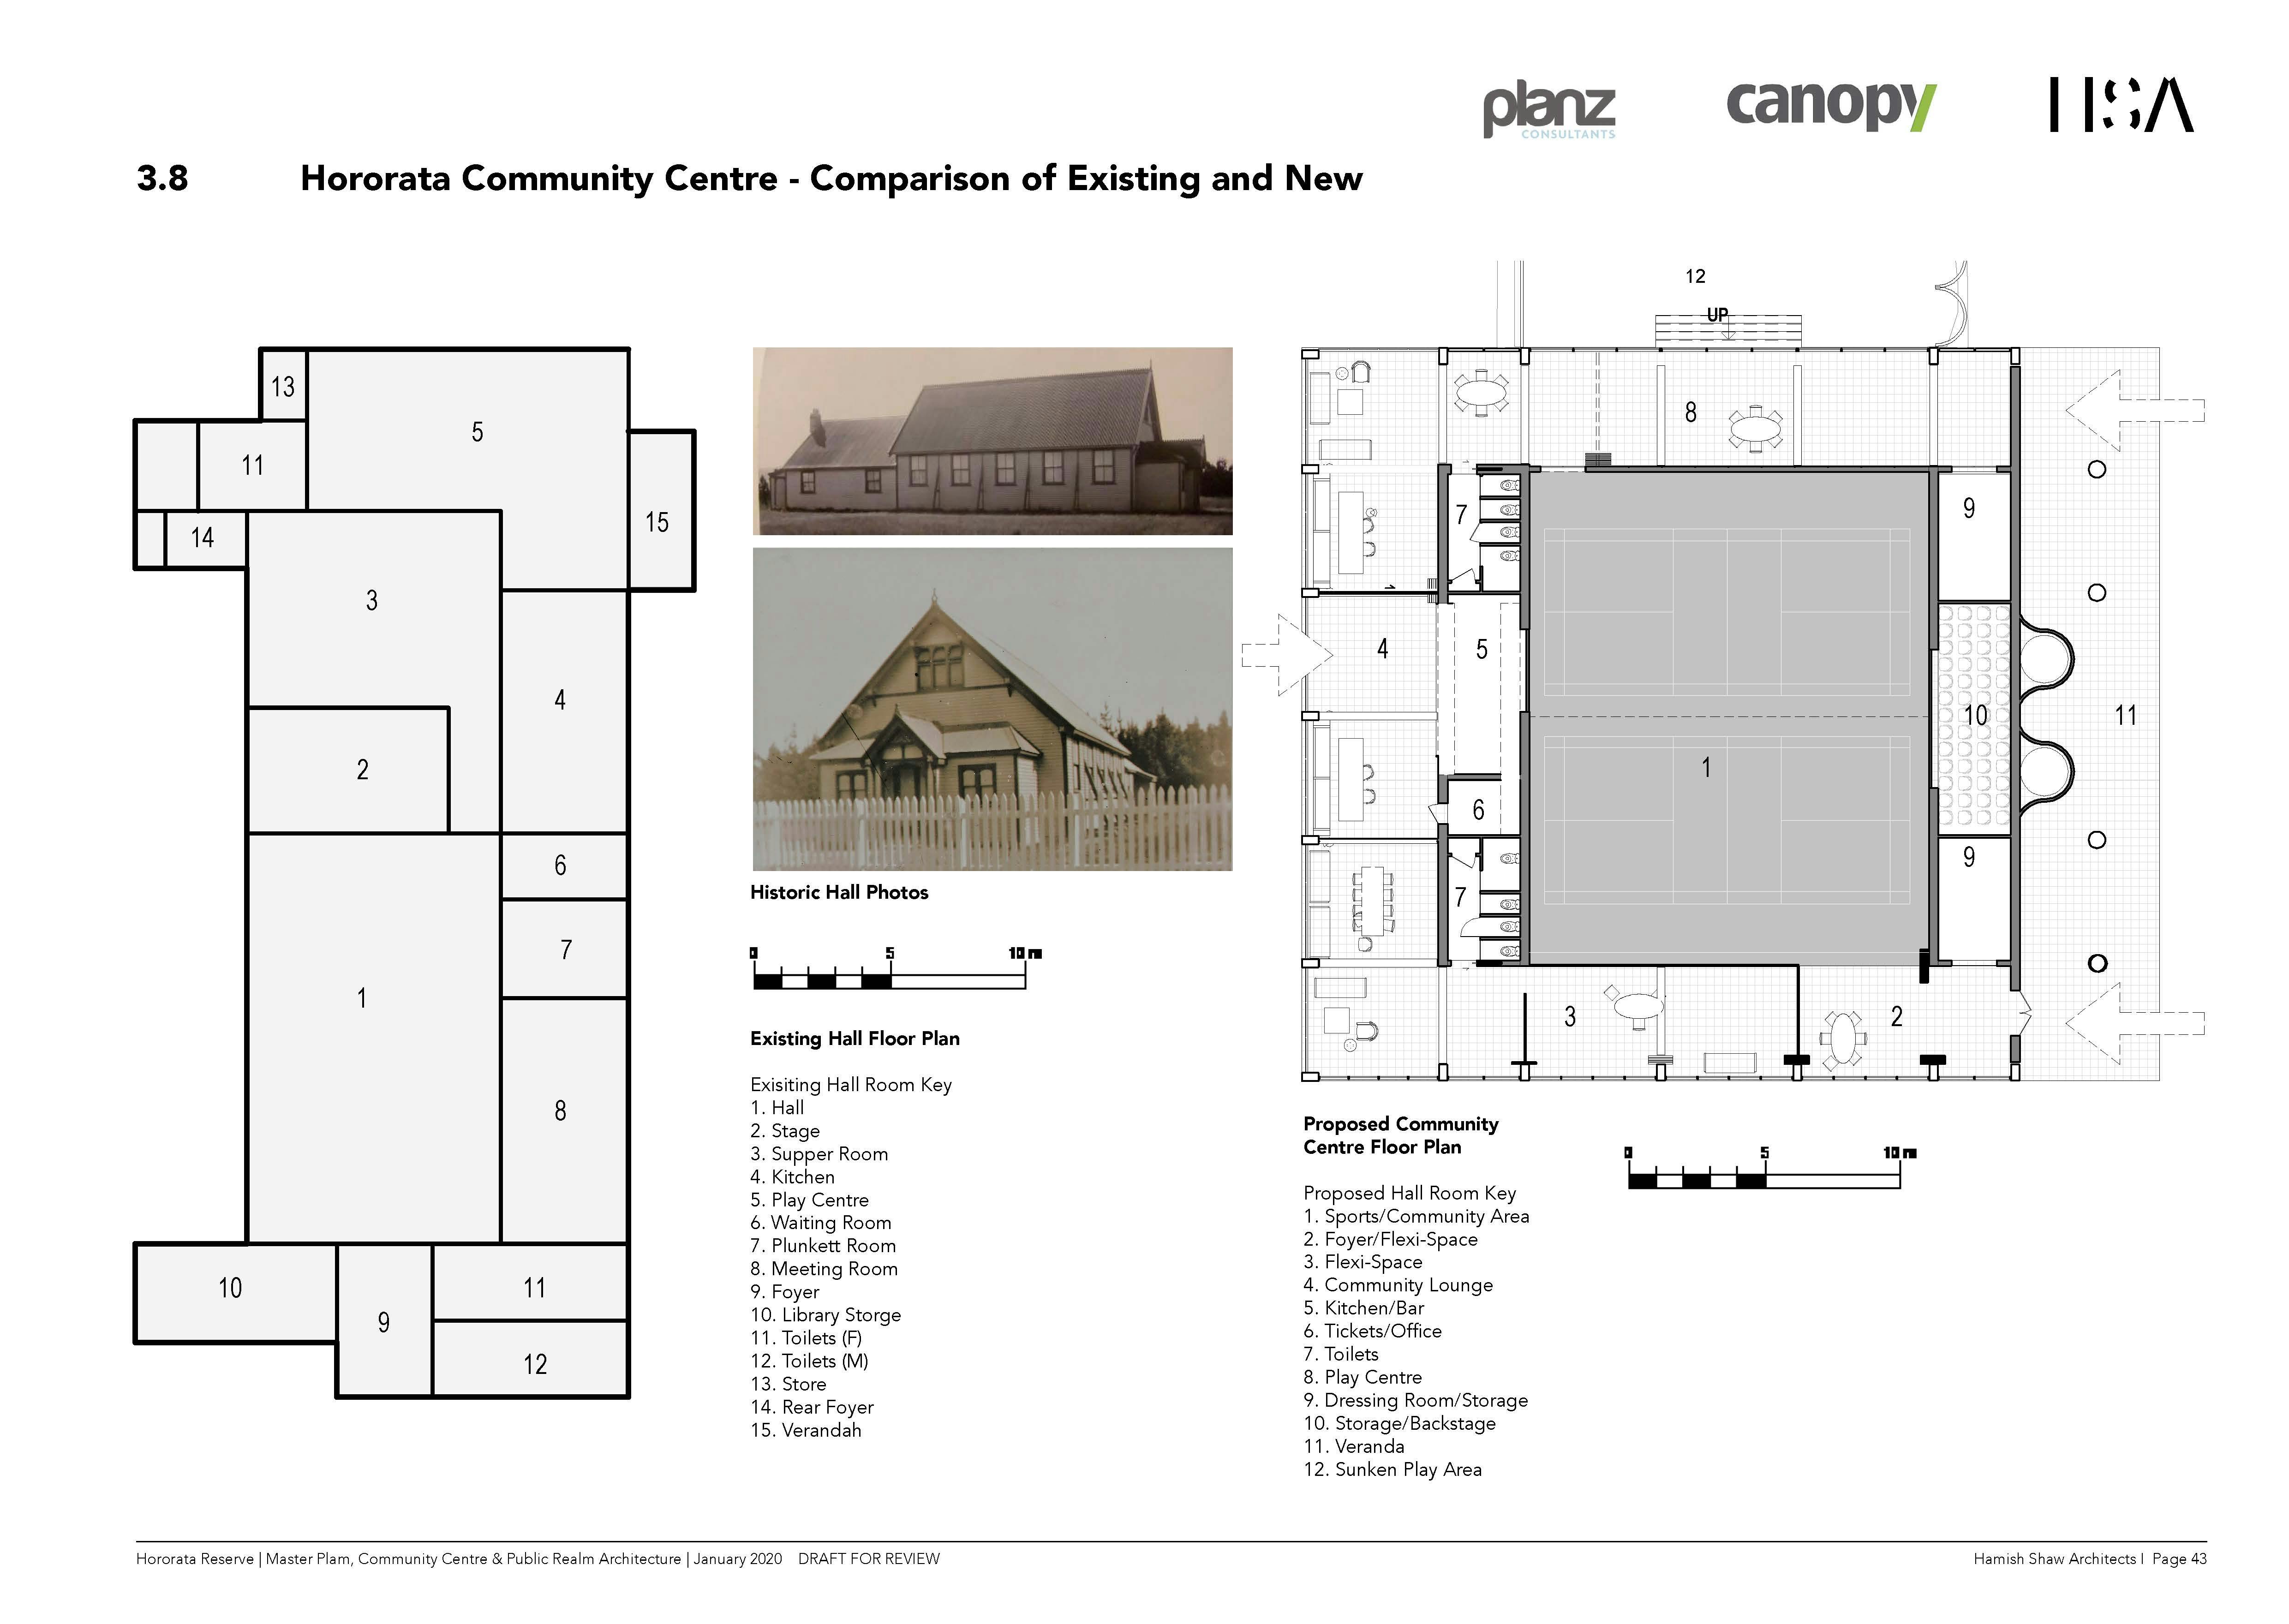 Community Centre - Comparison of existing and new